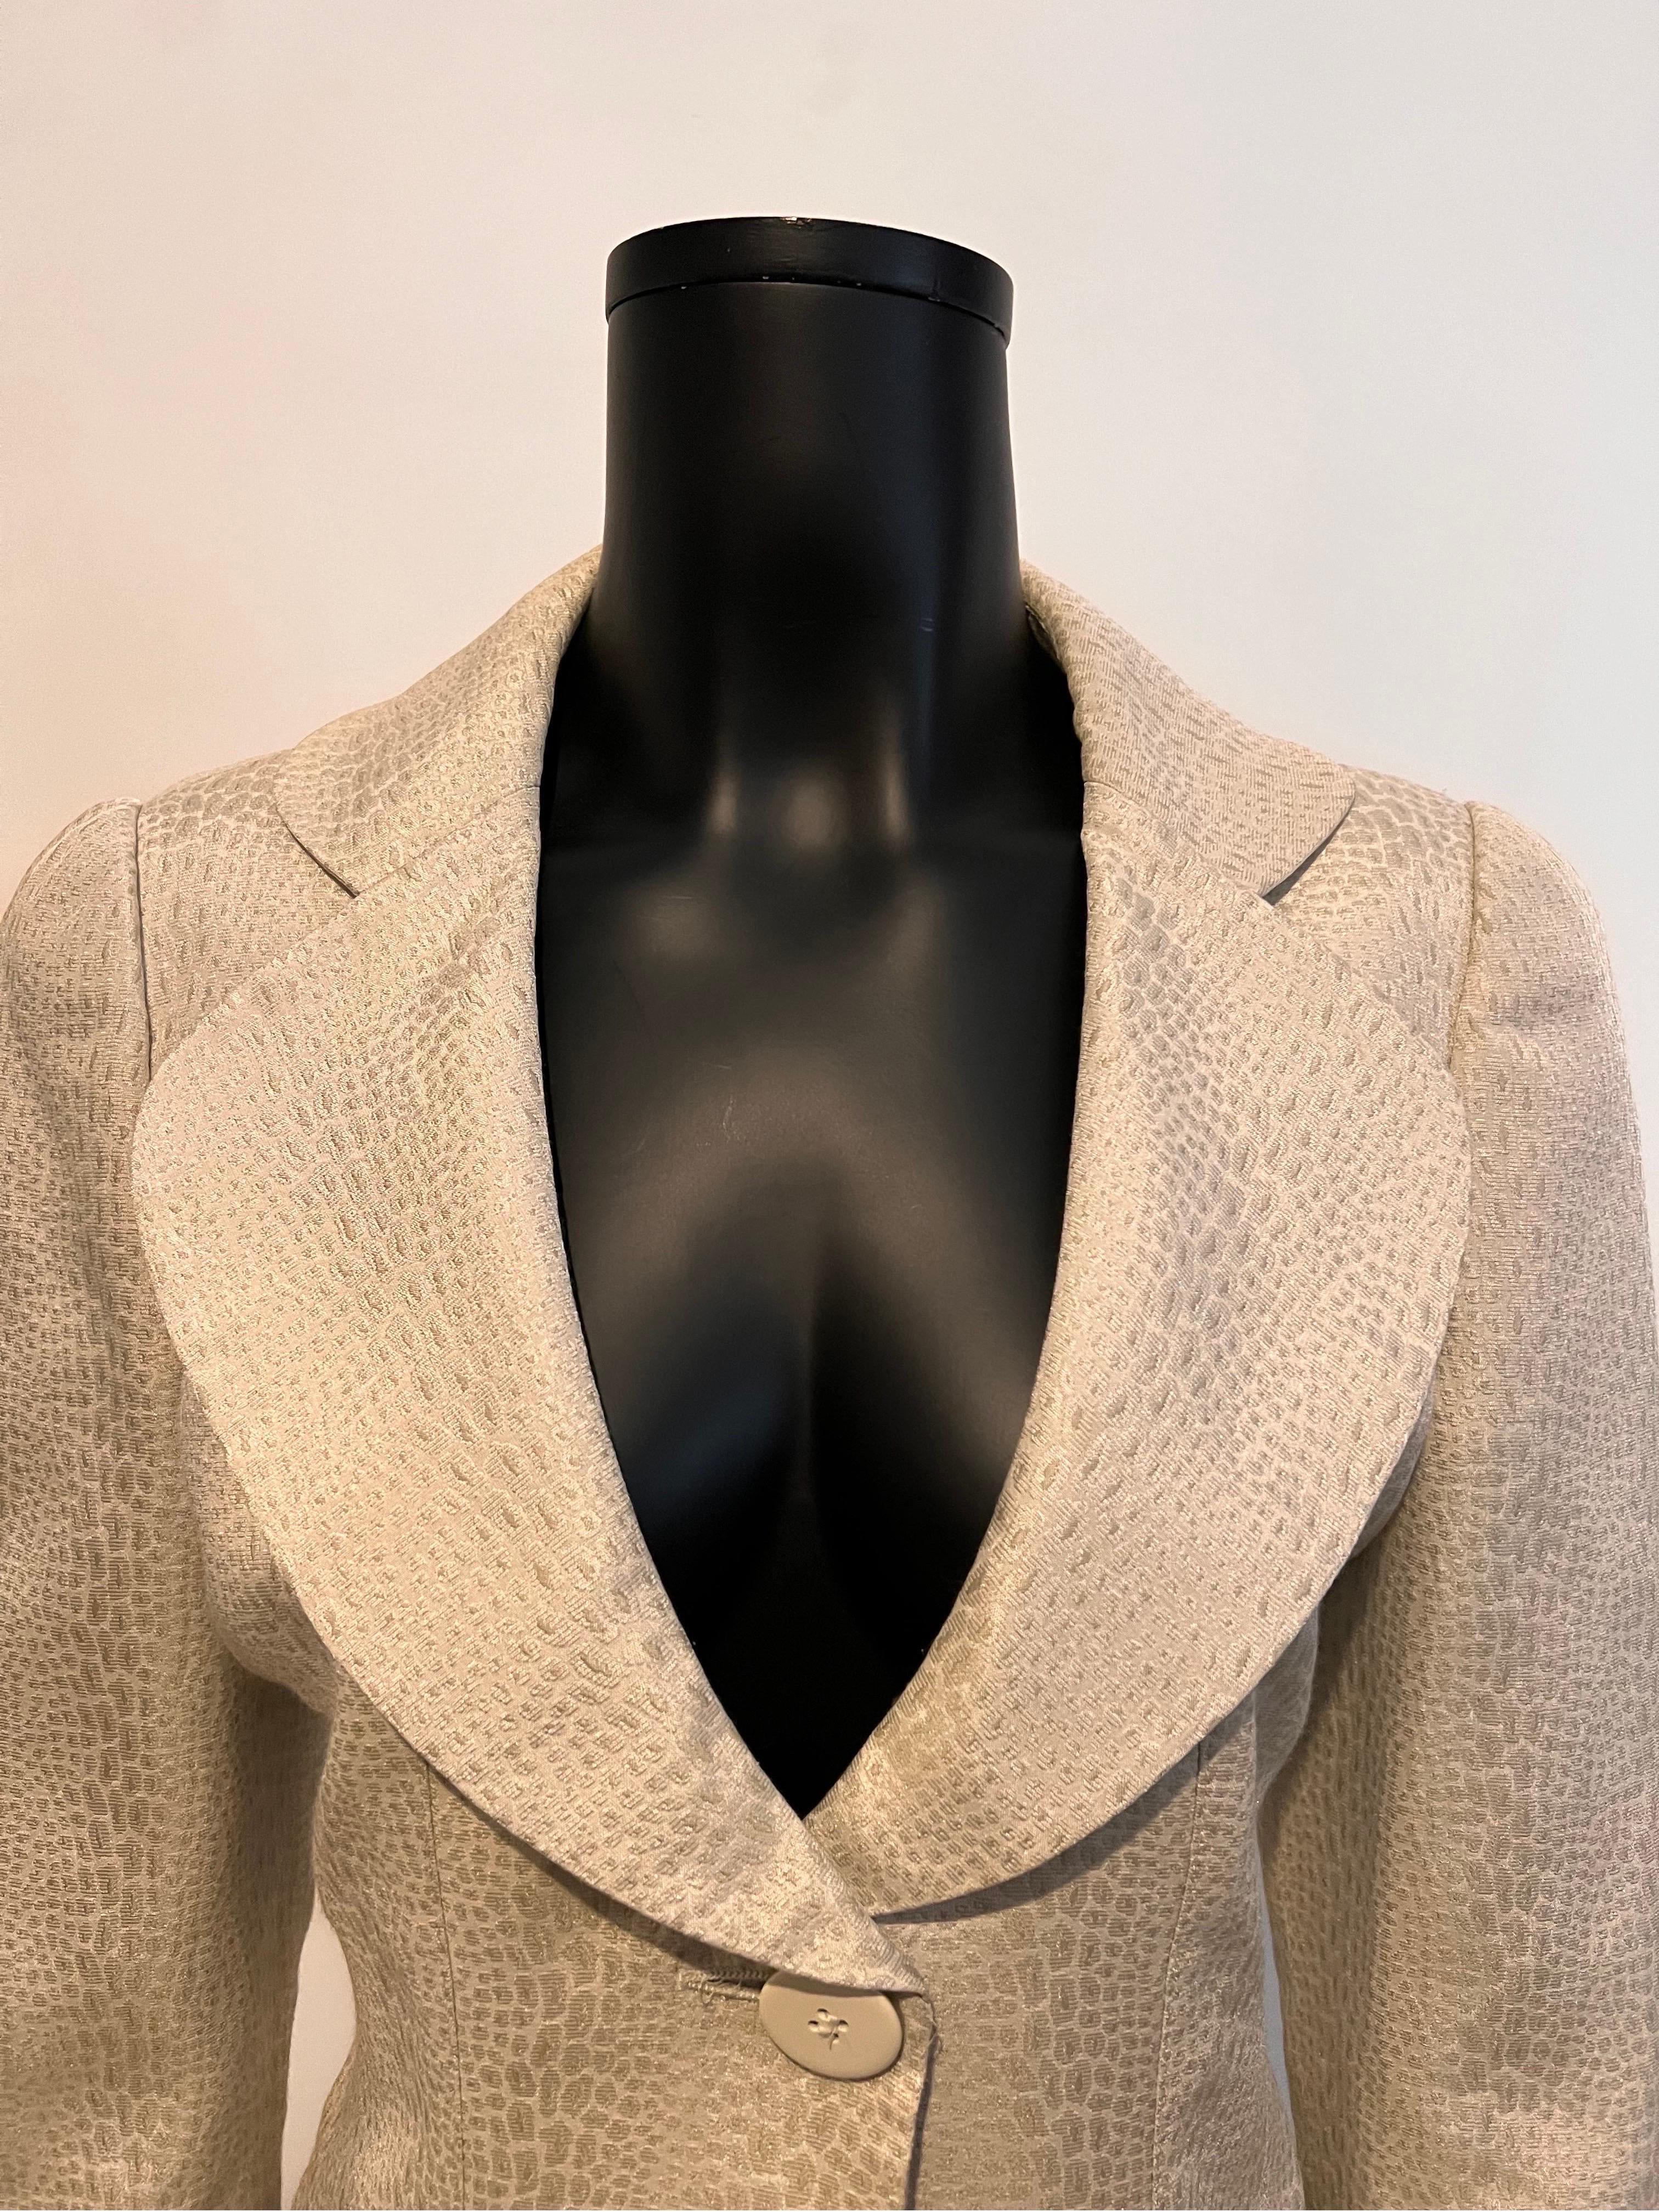 An archive 2007 vintage Armani Collezioni cropped evening jacket in a beautiful reptile/python style embossed fabric with one button and soft gathered detail on the lower part of the garment.

Oversized rounded lapel and collar with set in rounded